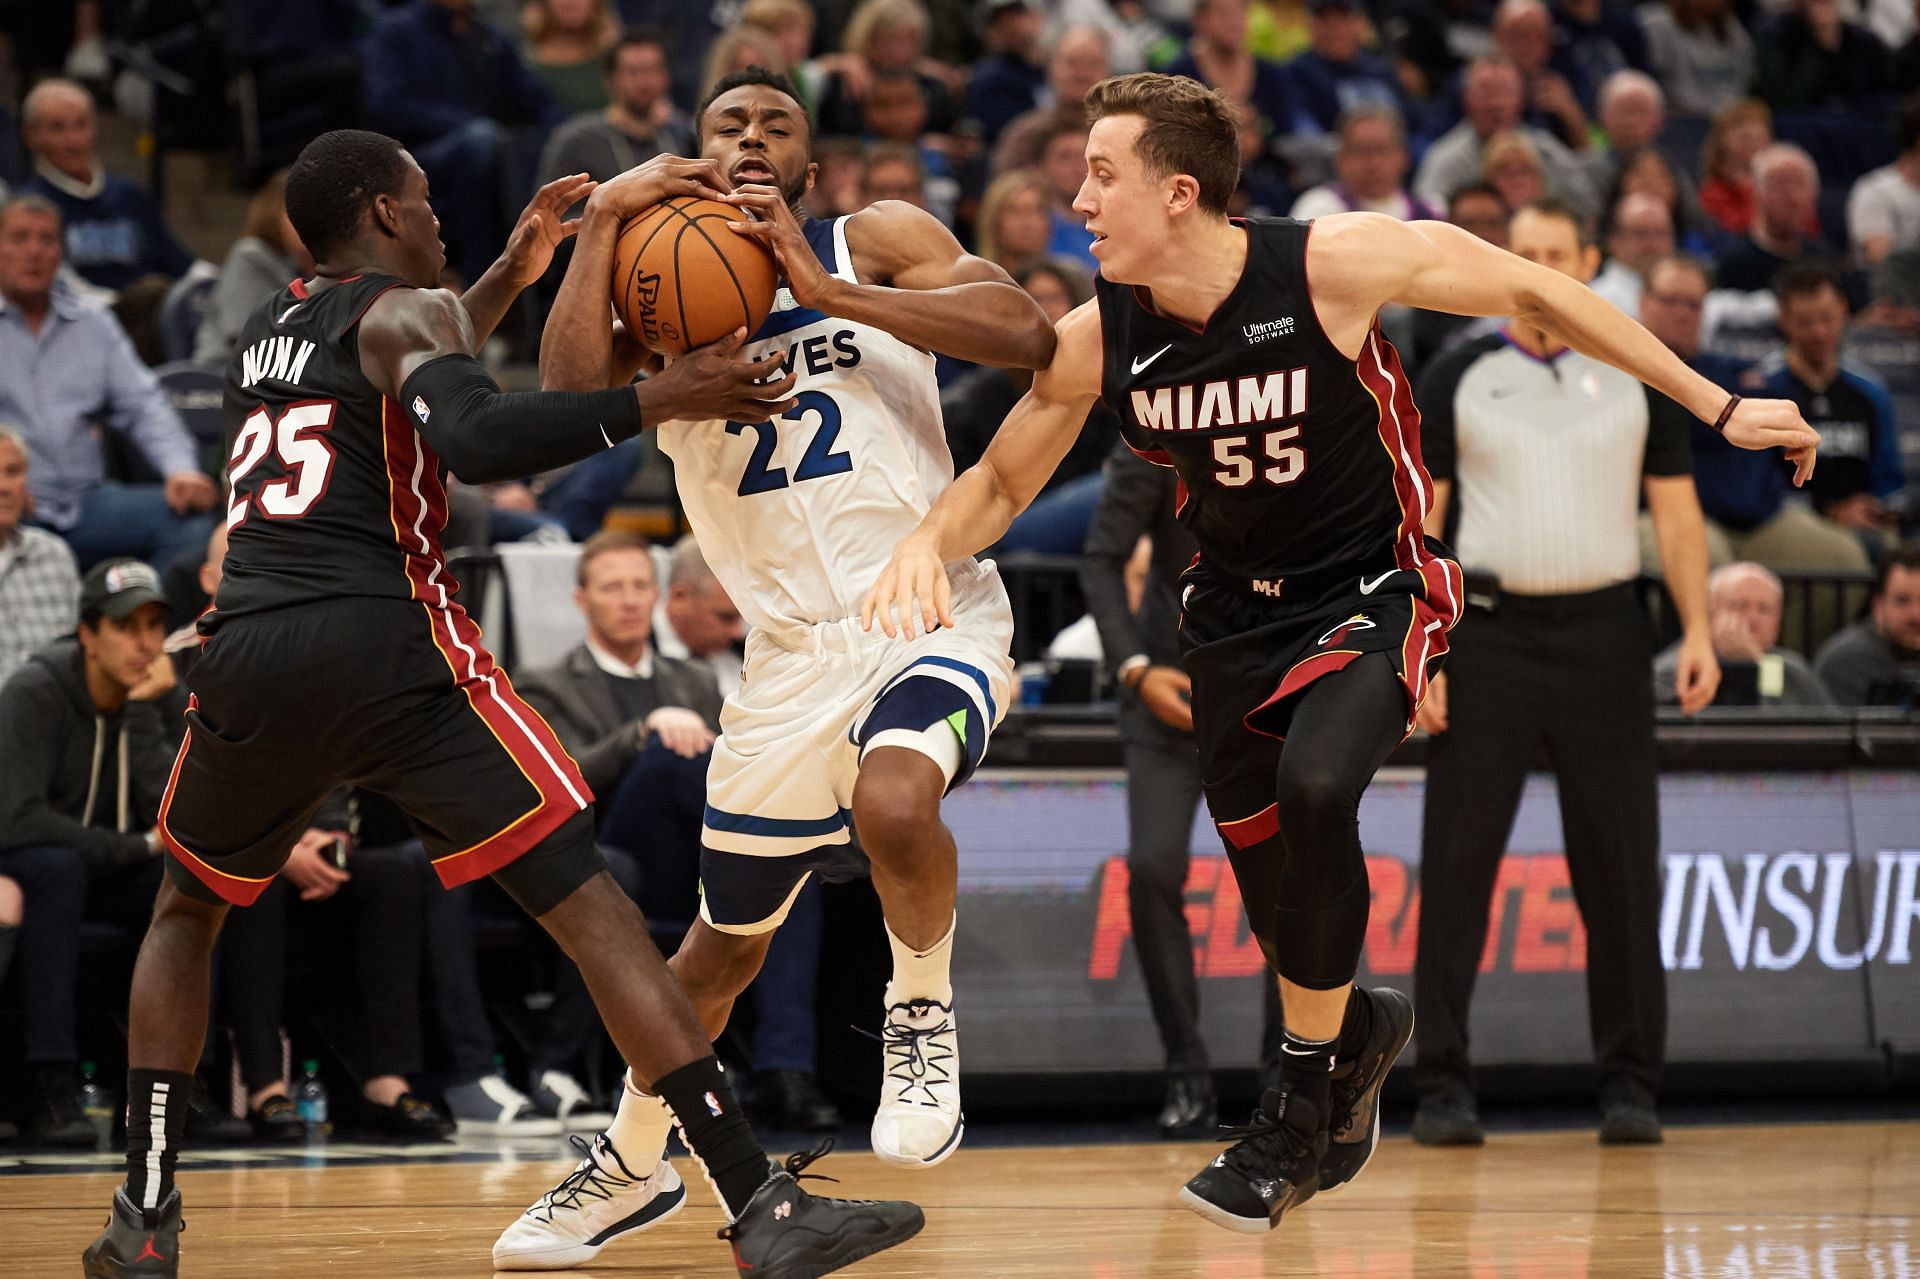 The Minnesota Timberwolves will host the Miami Heat in a regular-season game on November 24th.